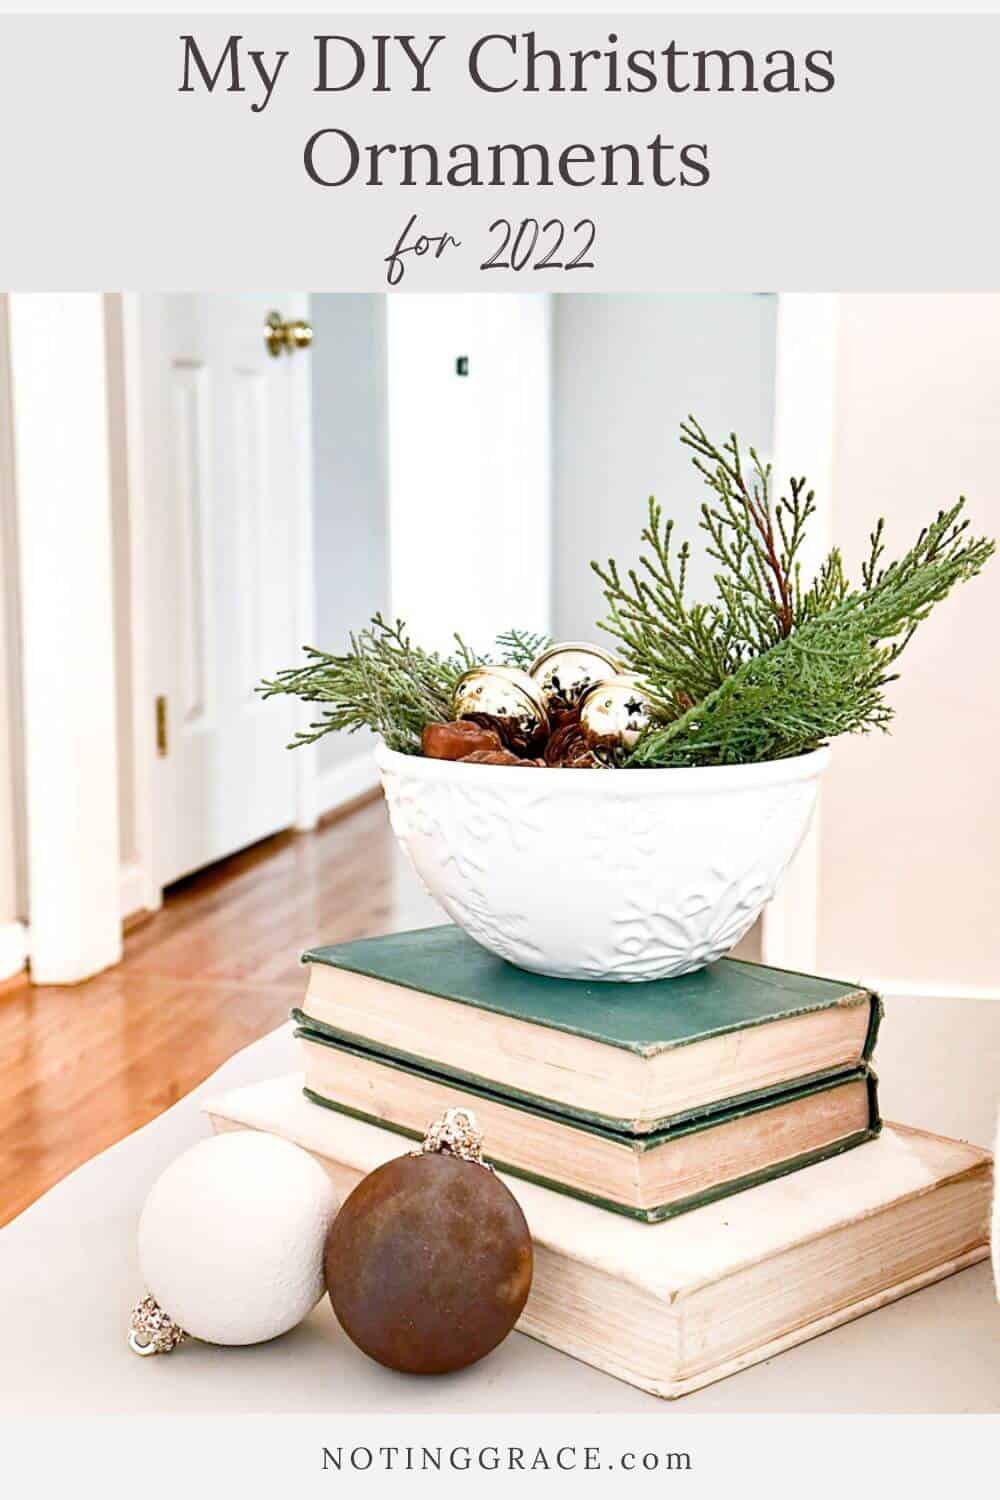 snowflake dish filled with greenery and bells sitting on books next to 2 ornaments